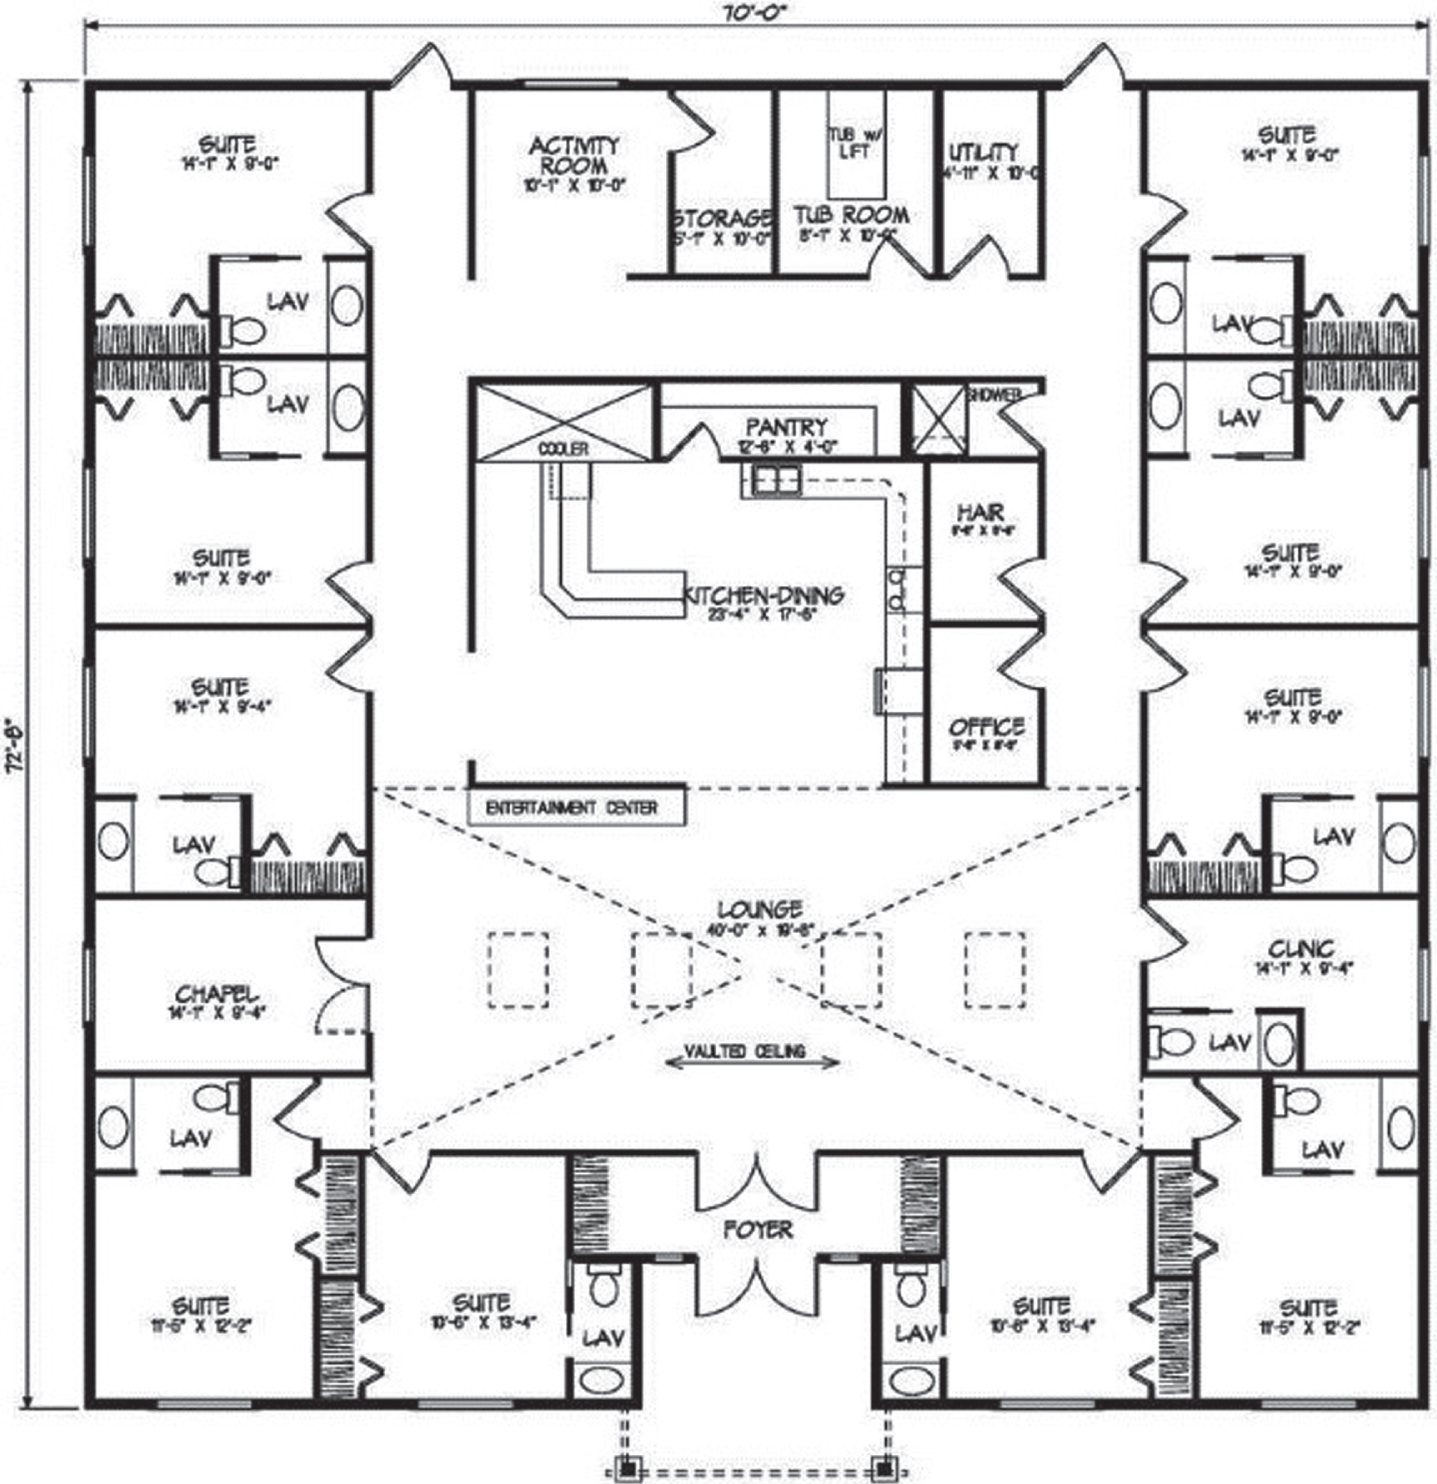 A floor plan with central hearth area to aid in wayfinding. Reprinted from Google Free Images.